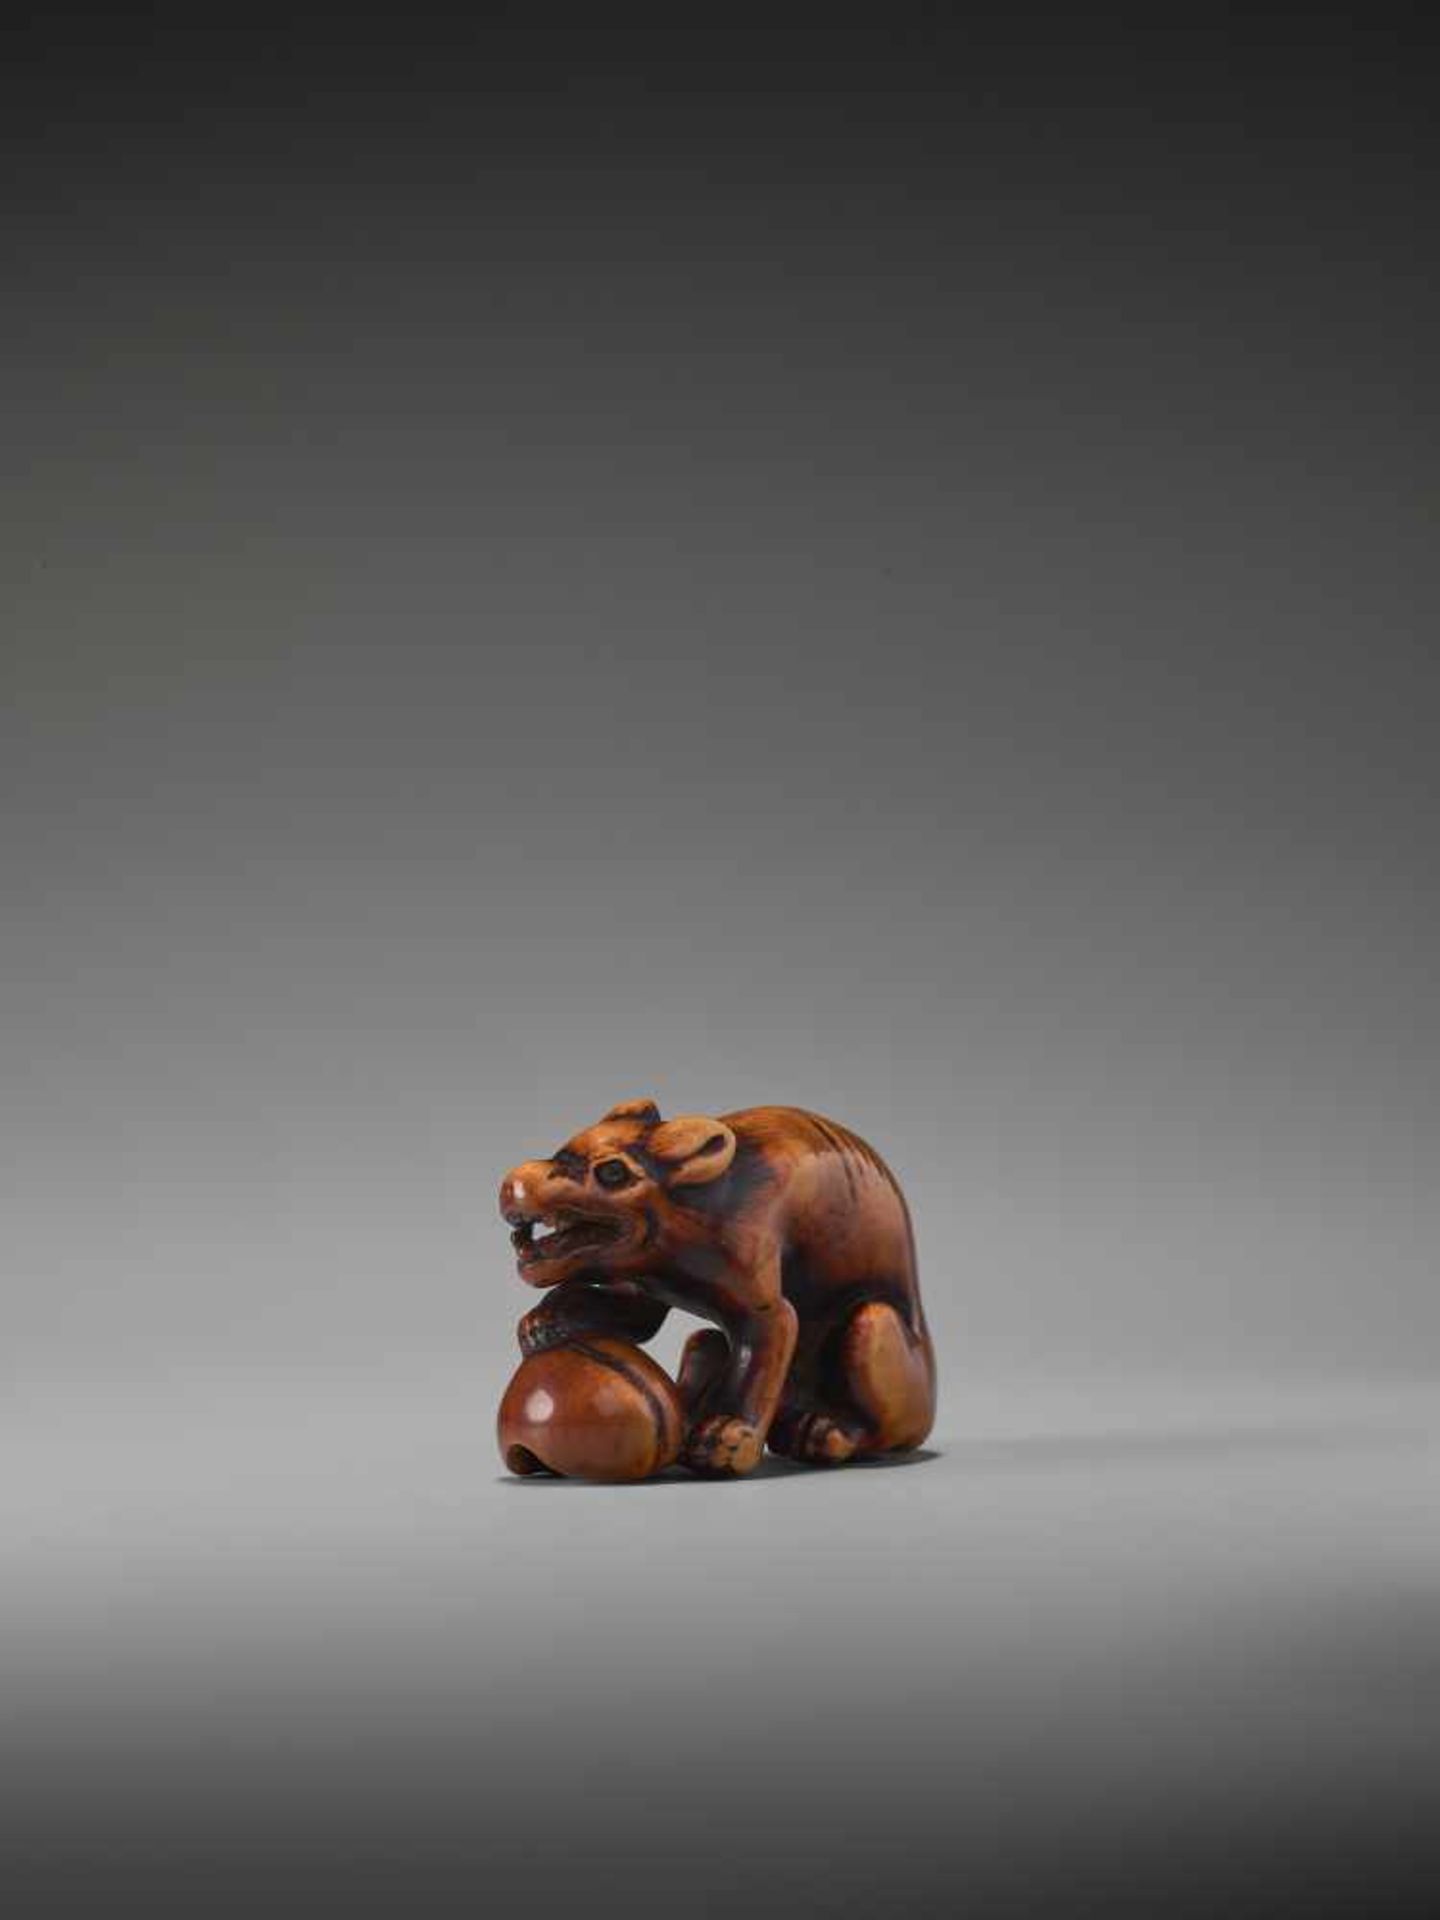 A POWERFUL WOOD NETSUKE OF A WOLF WITH A SKULL UnsignedJapan, 18th century, Edo period (1615-1868) - Image 3 of 9